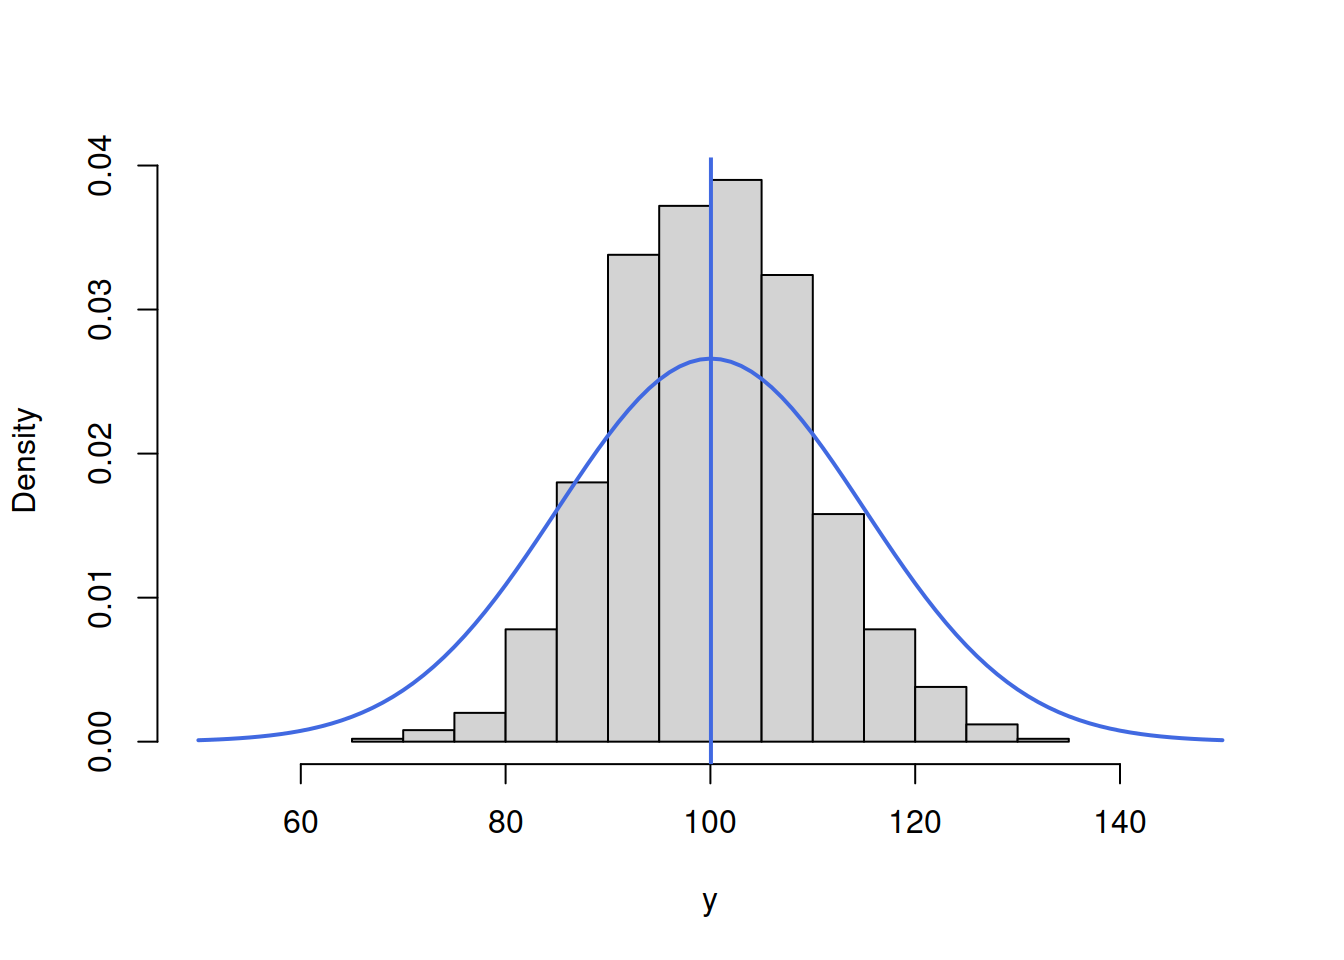 ML example with Normal curve and $\hat{\mu}_y=\bar{y}$ and $\hat{\sigma}=15$